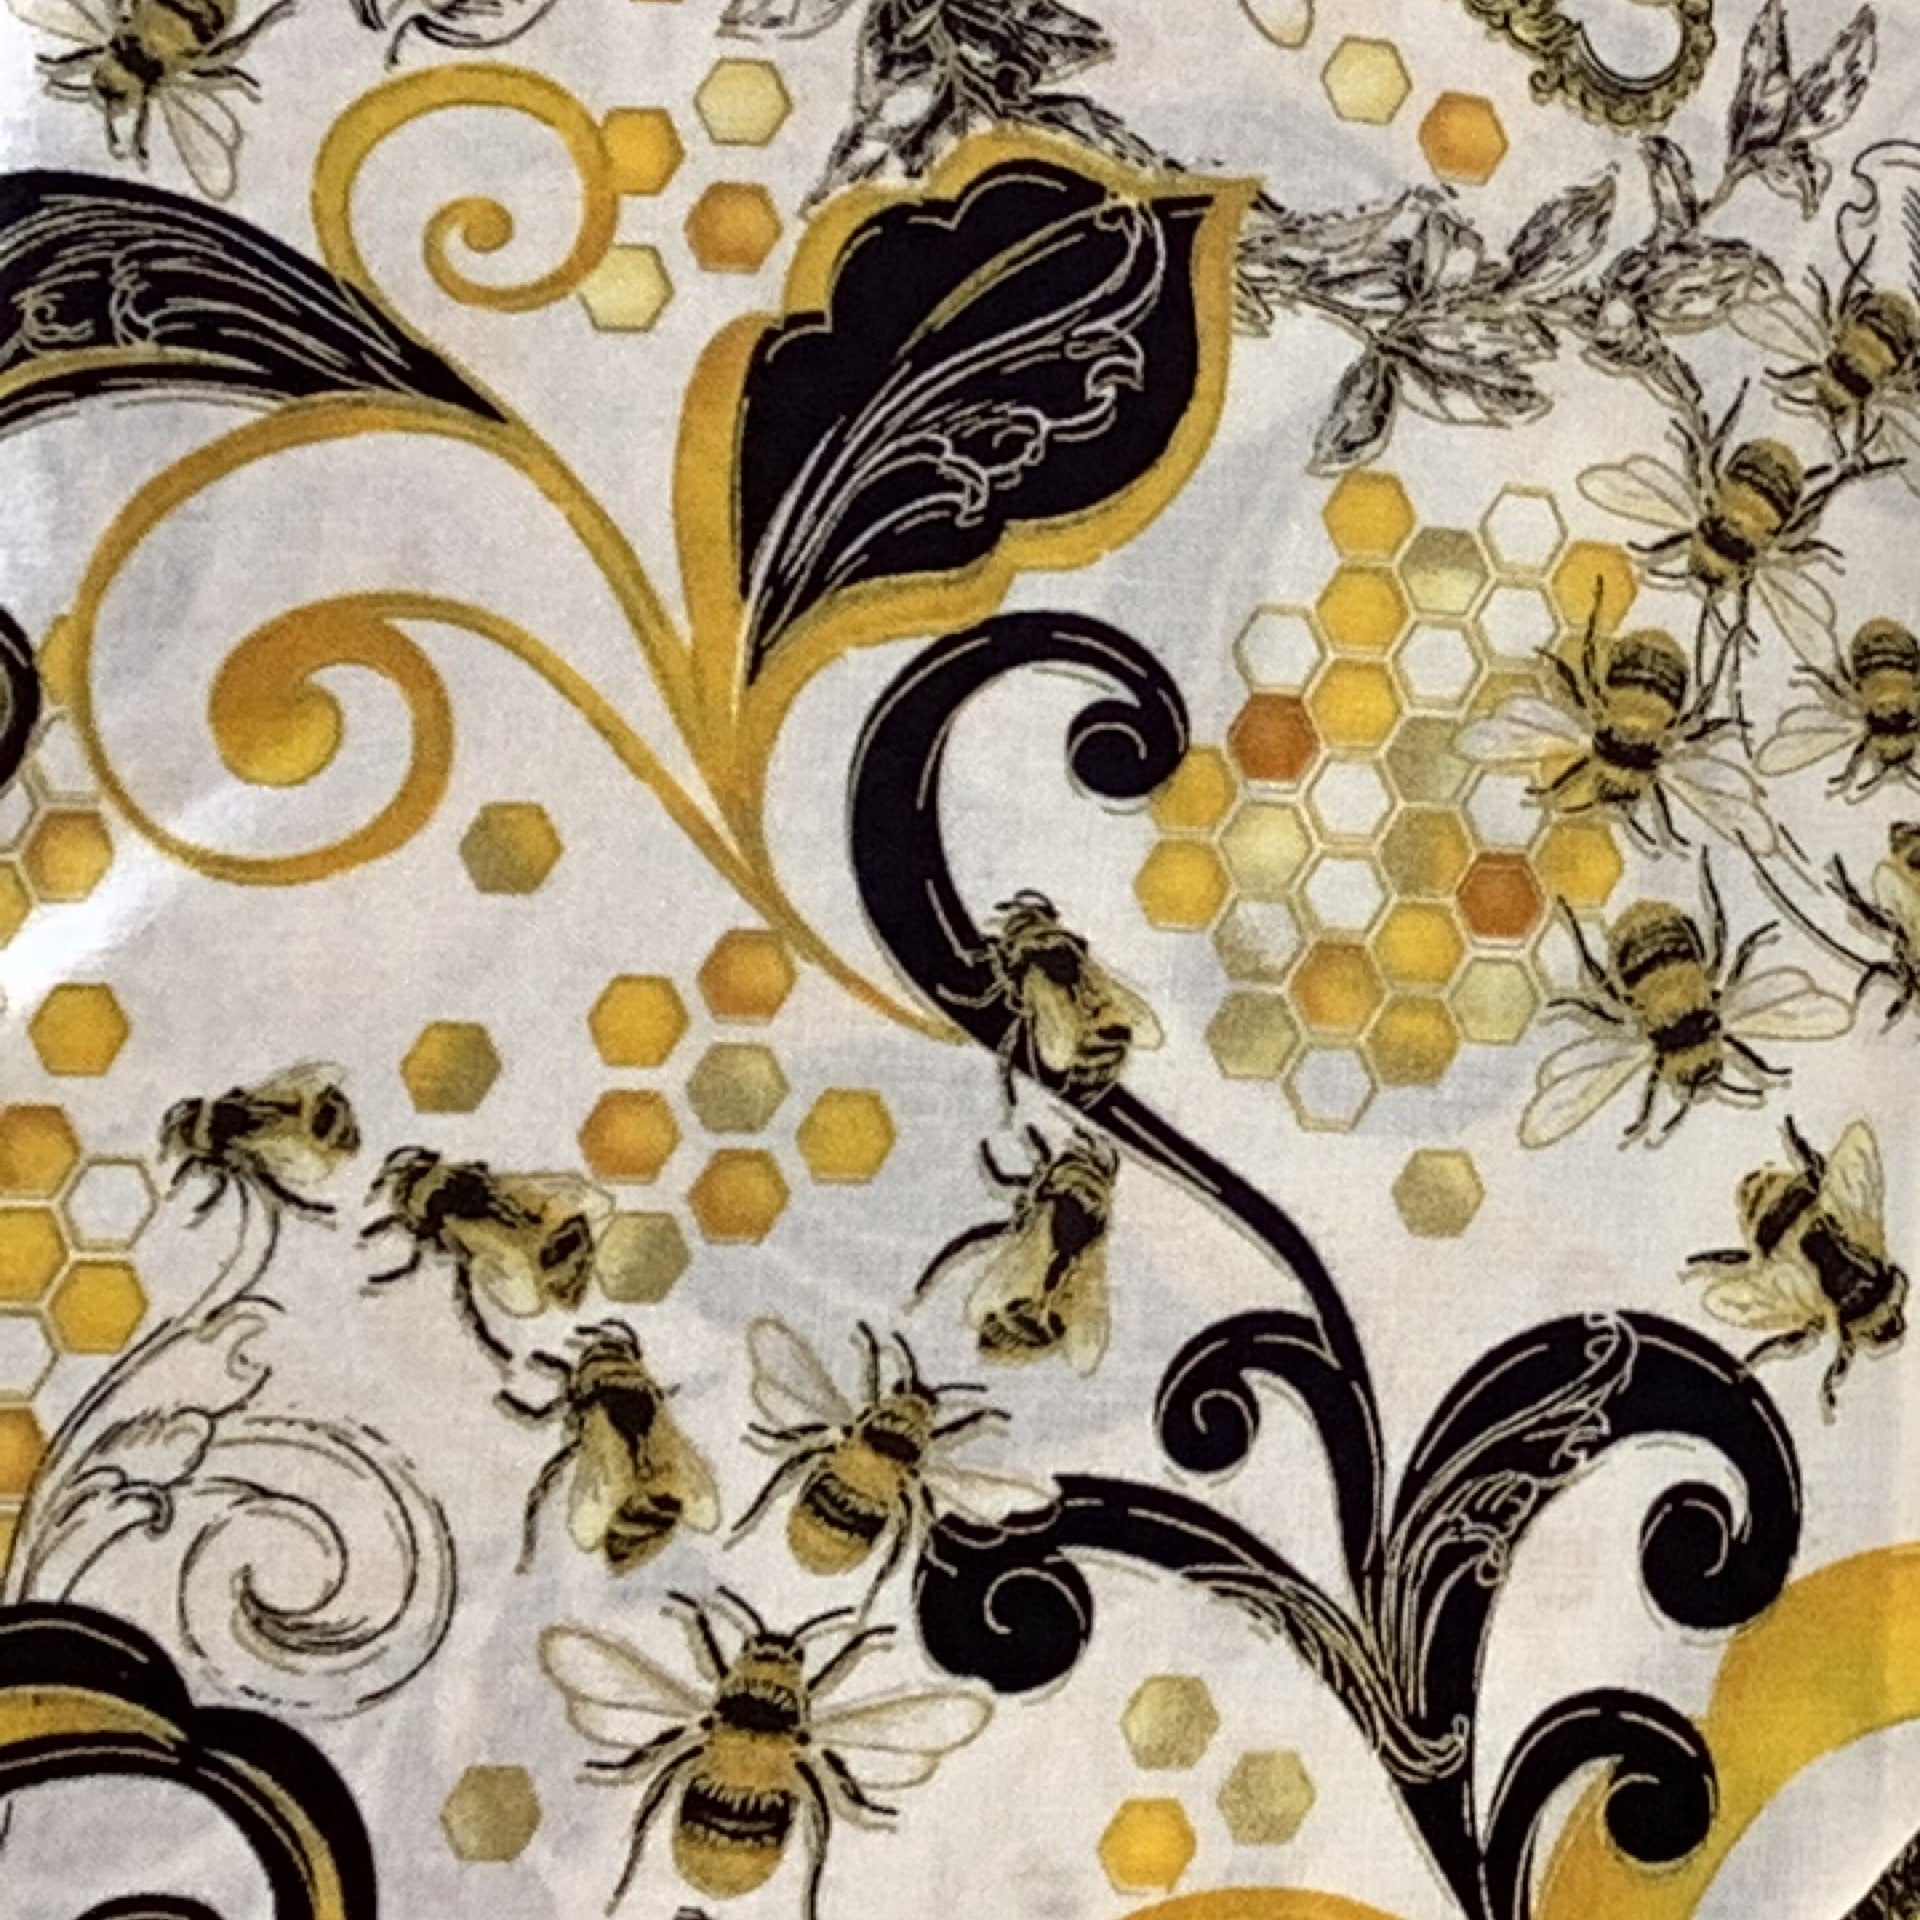 Yellow Gold Fabric For Quilting